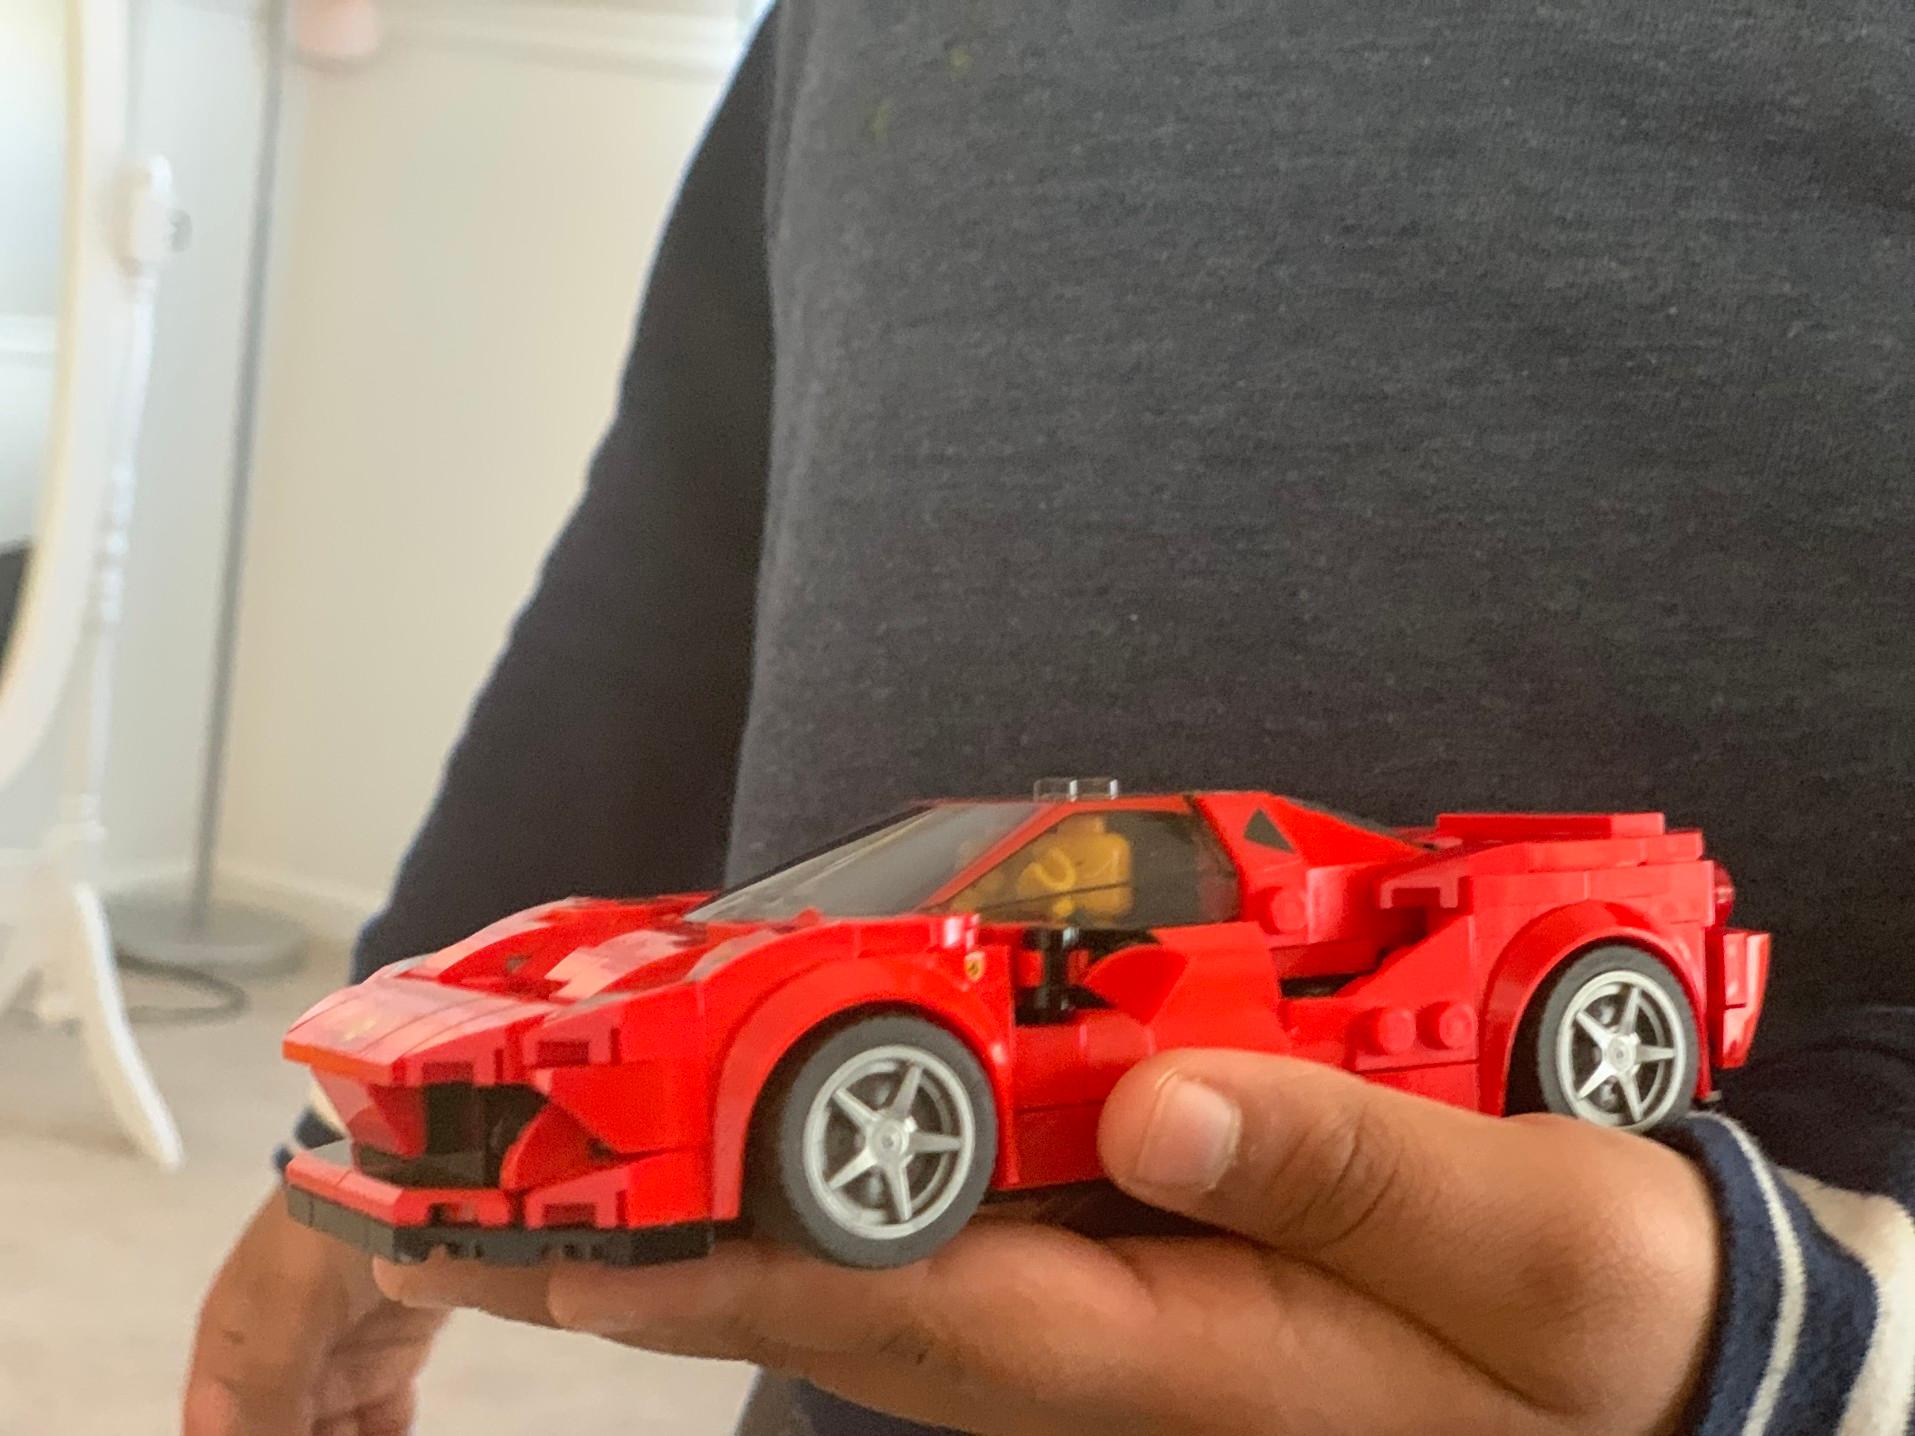 LEGO car sets come in all shapes and sizes.